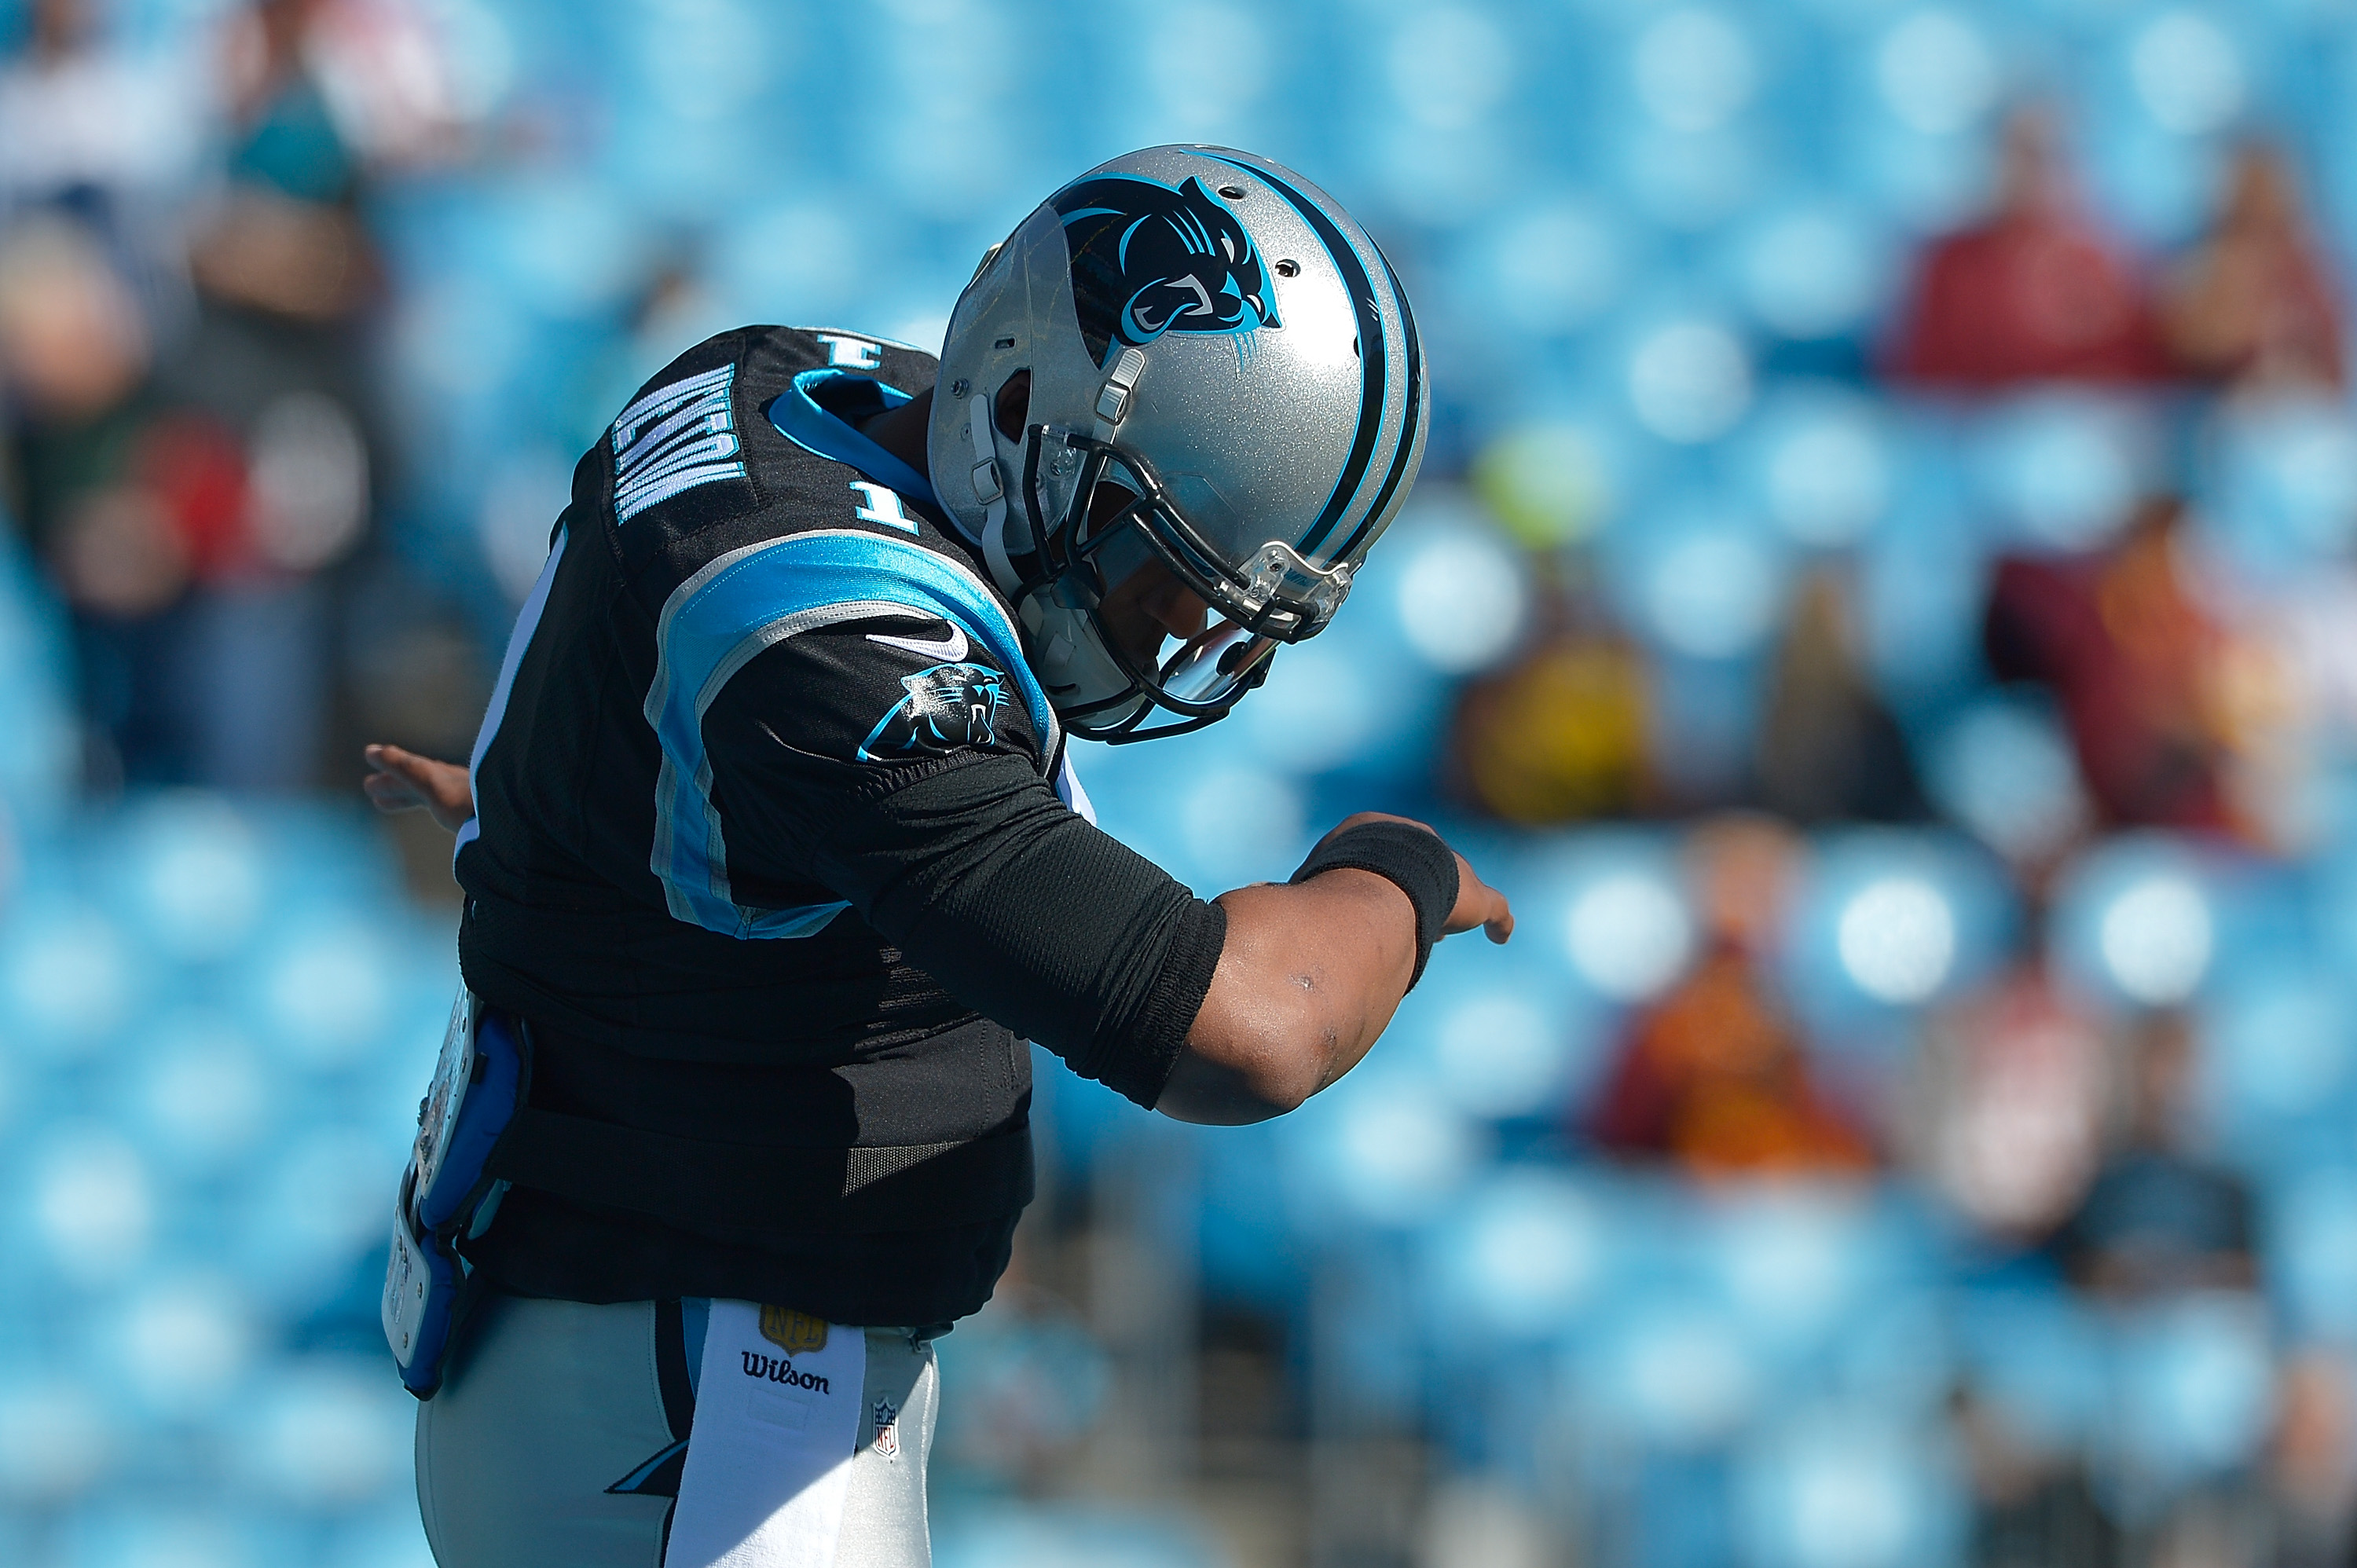 Cam Newton #1 of the Carolina Panthers dances The Dab as he warms up during their game against the Washington Redskins at Bank of America Stadium on November 22, 2015 in Charlotte, North Carolina. The Panthers won 44-16. (Grant Halverson&mdash;Getty Images)